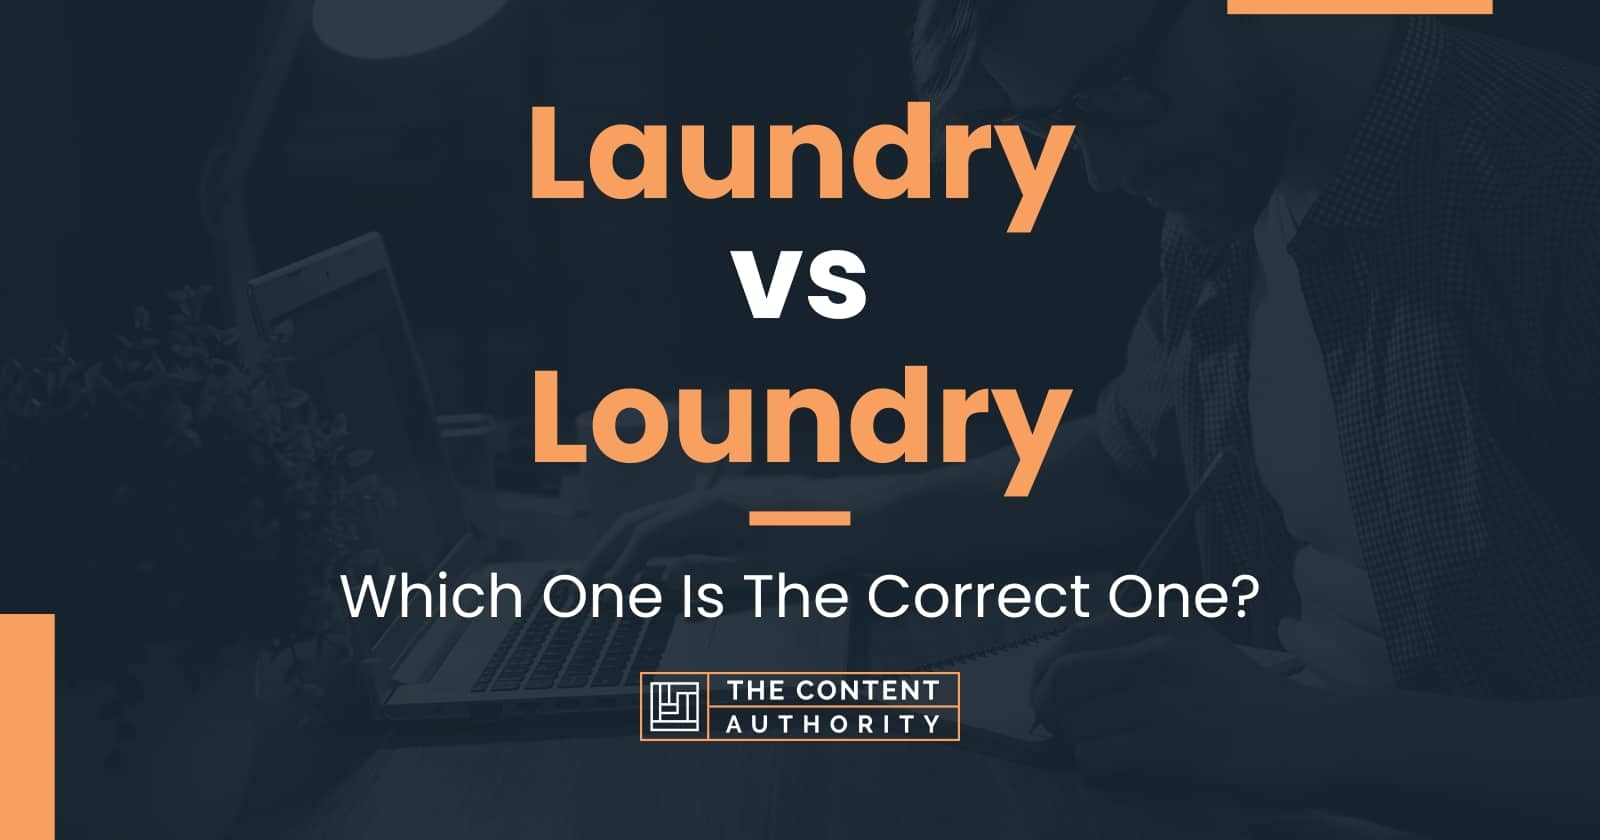 Laundry vs Loundry: Which One Is The Correct One?